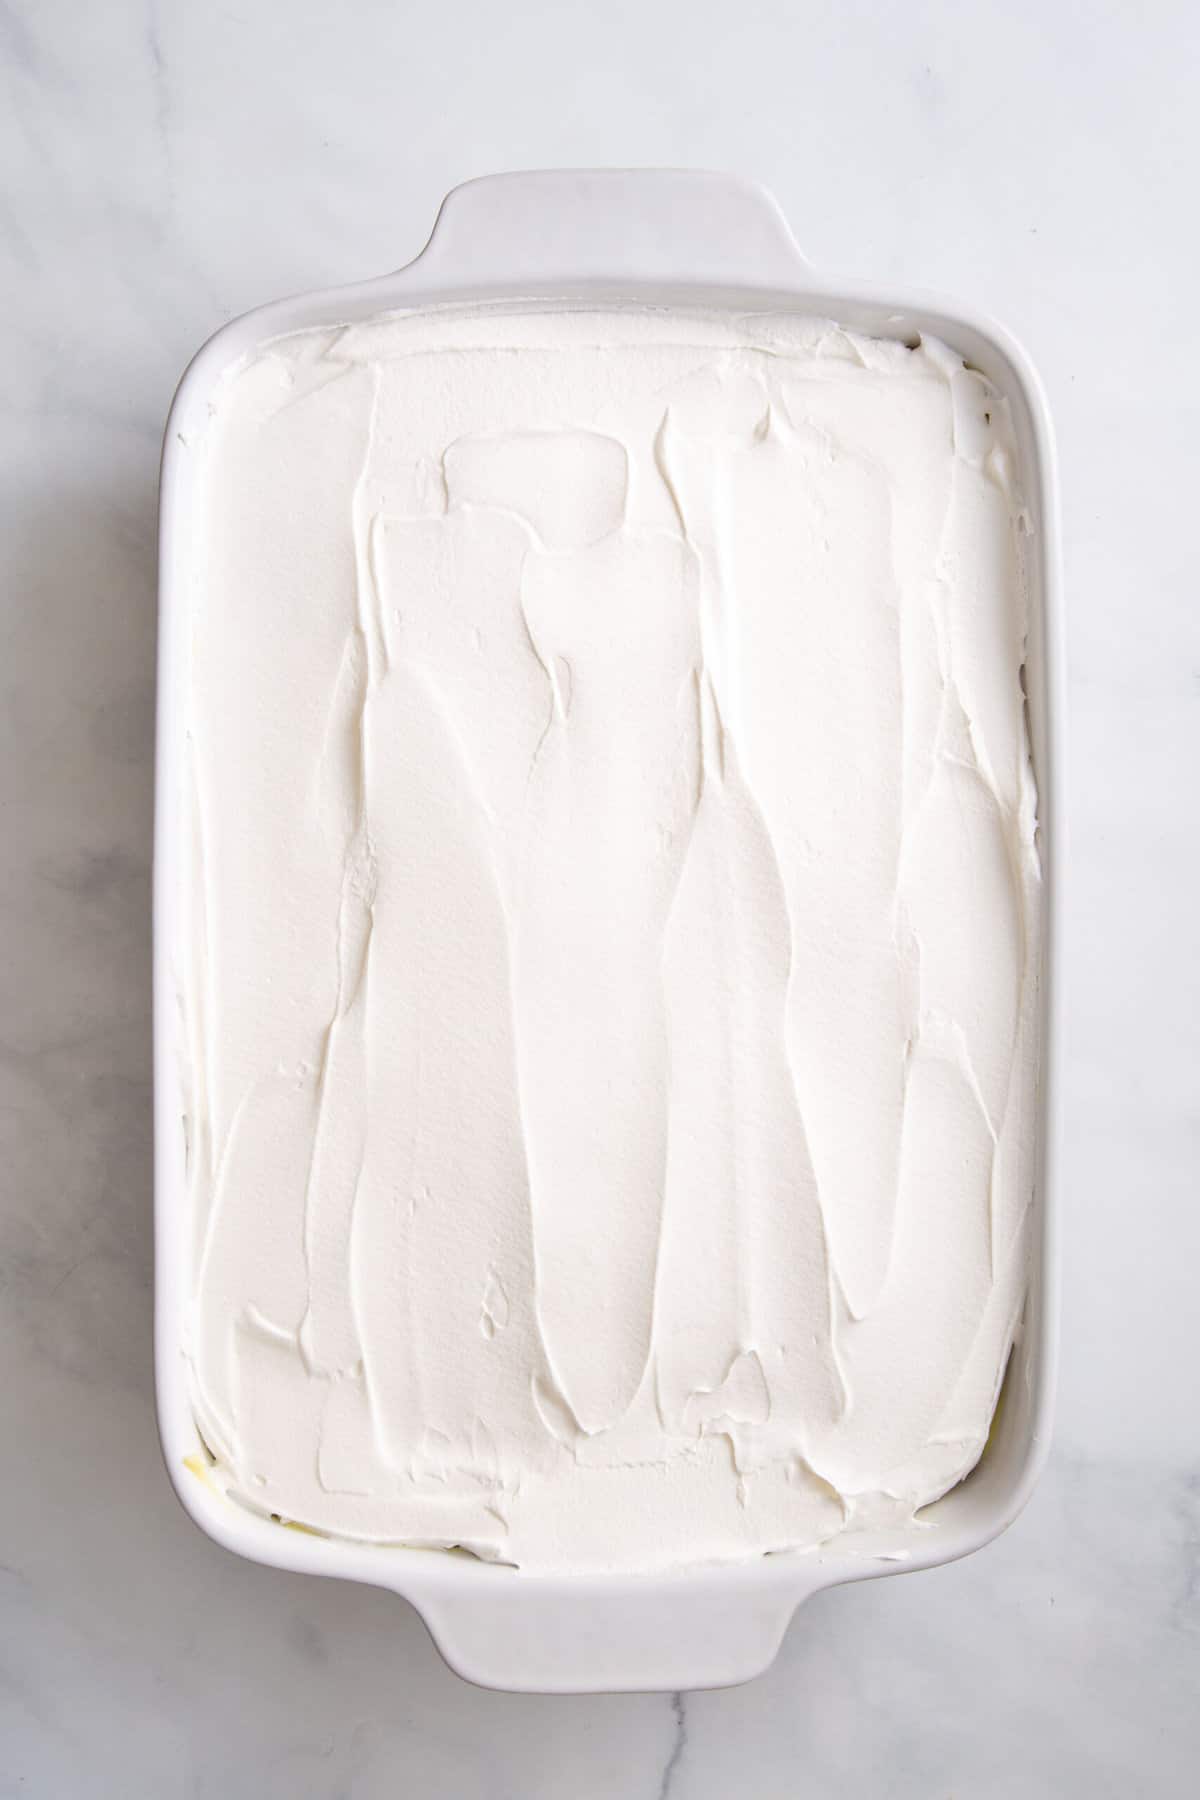 cool whip layered evenly in a 9x13 baking dish